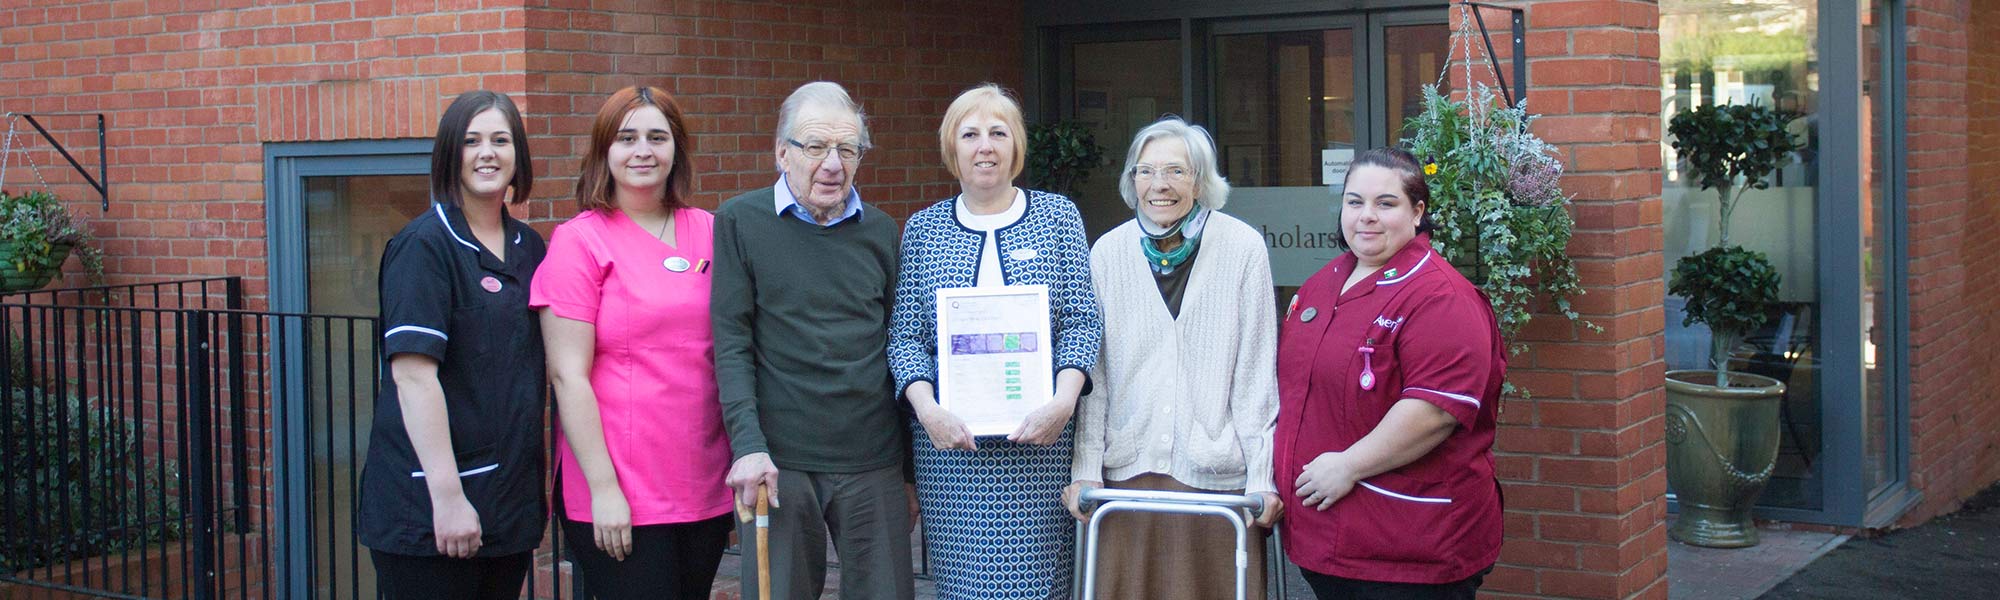 Scholars-Mews-Care-Home-Awarded Good CQC-inspection-2018